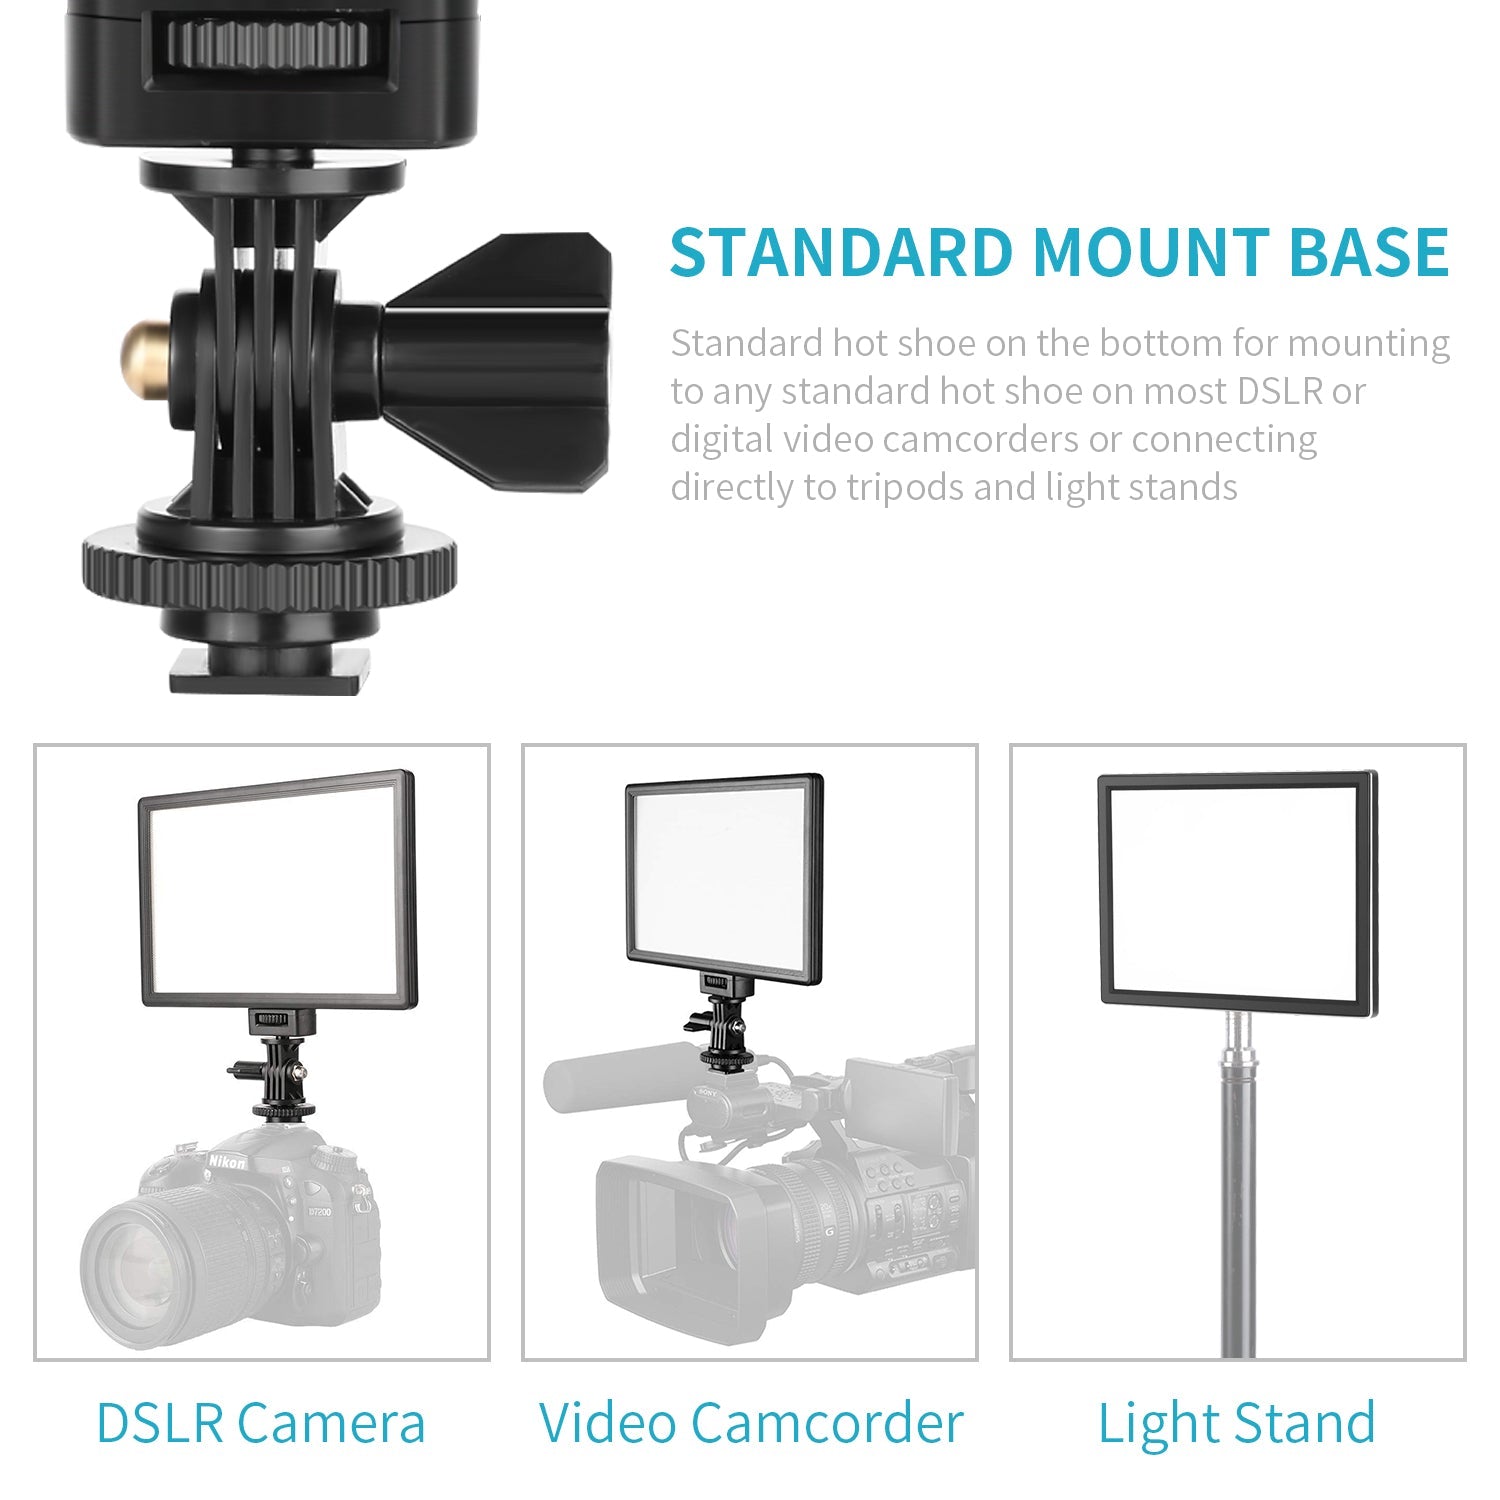 Neewer Dimmable Ultra Thin T100 Softer SMD LED Video Light Kit - neewer.com